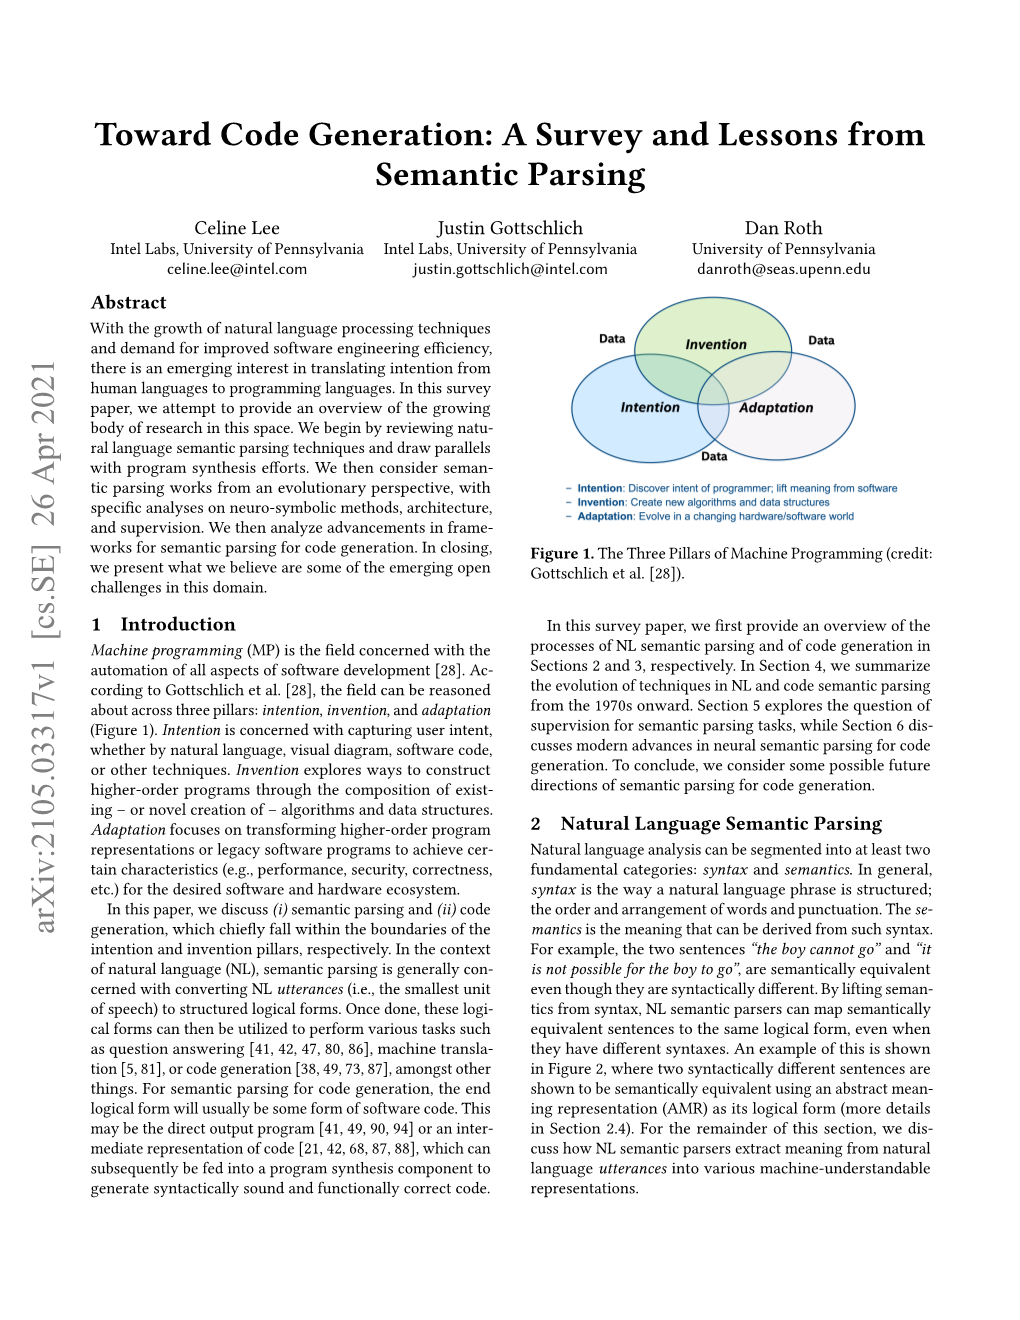 Toward Code Generation: a Survey and Lessons from Semantic Parsing